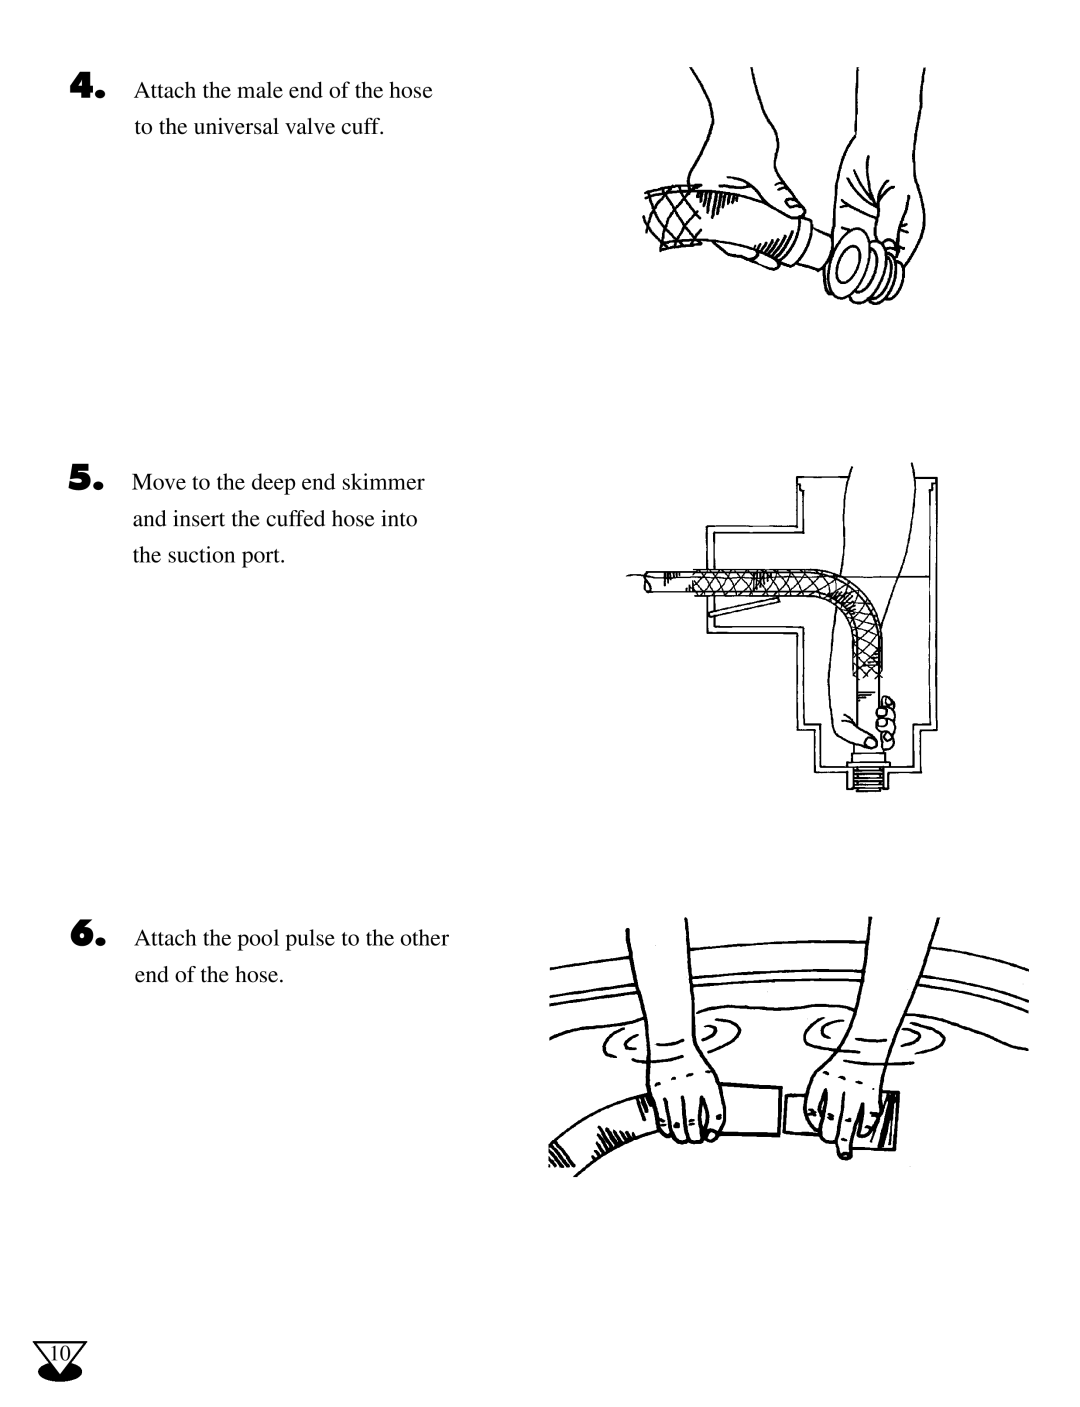 Baracoda G3 owner manual Attach the male end of the hose to the universal valve cuff 